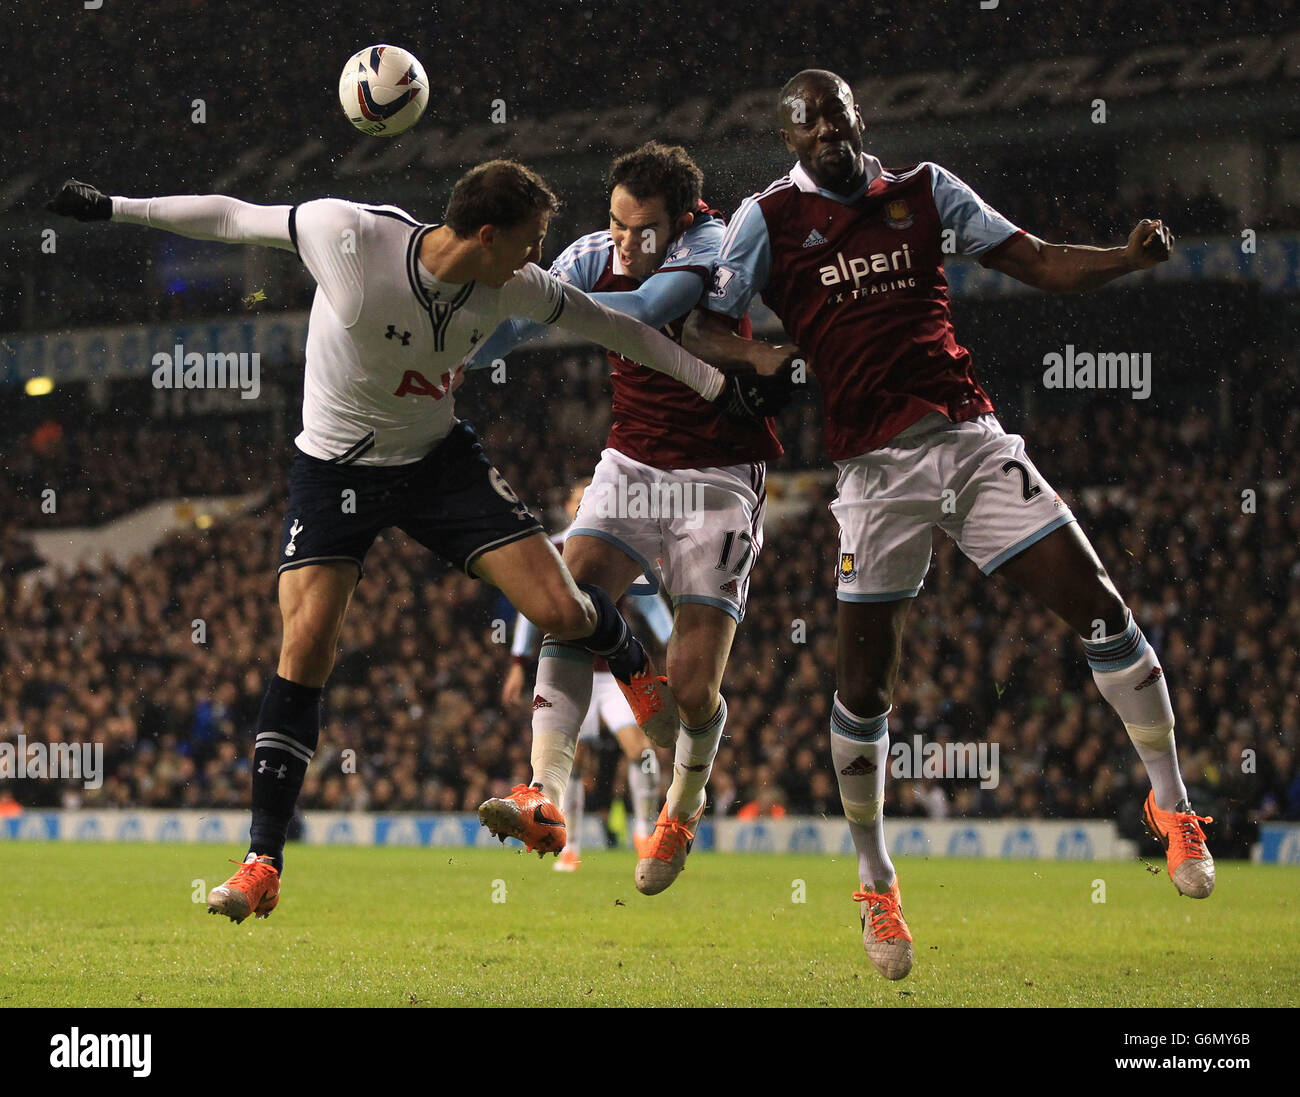 Tottenham Hotspur's Vlad Chiriches goes for header with West Ham United's Joey O'Brien and Carlton Cole during the Capital One Cup match at White Hart Lane, London. Stock Photo